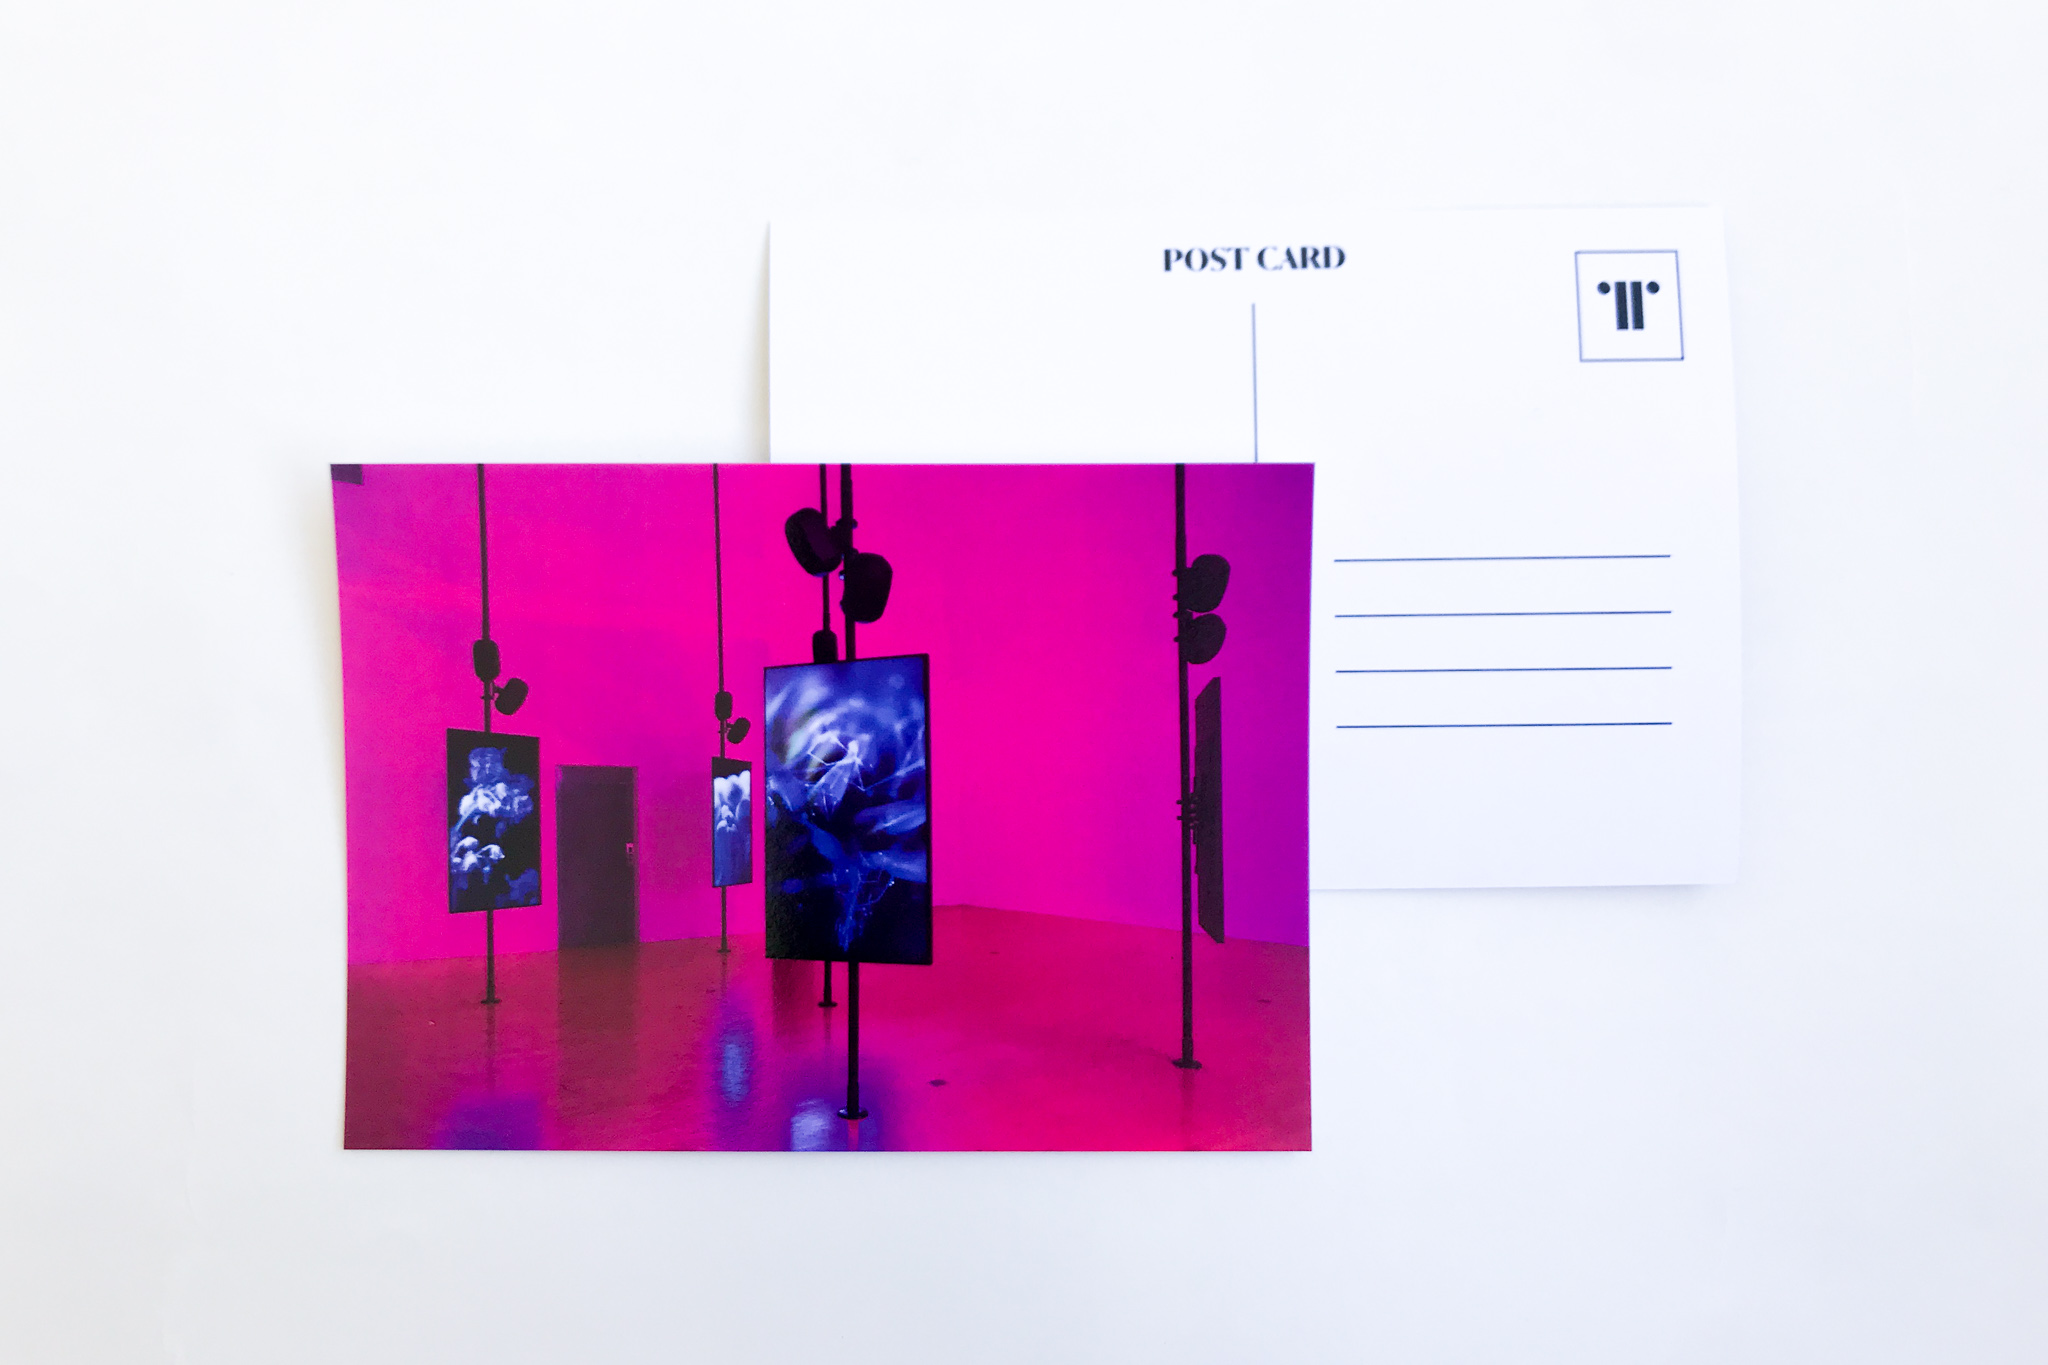 A5 postcard with image of Angelica Mesiti's 'Over the Air and Underground' installation.